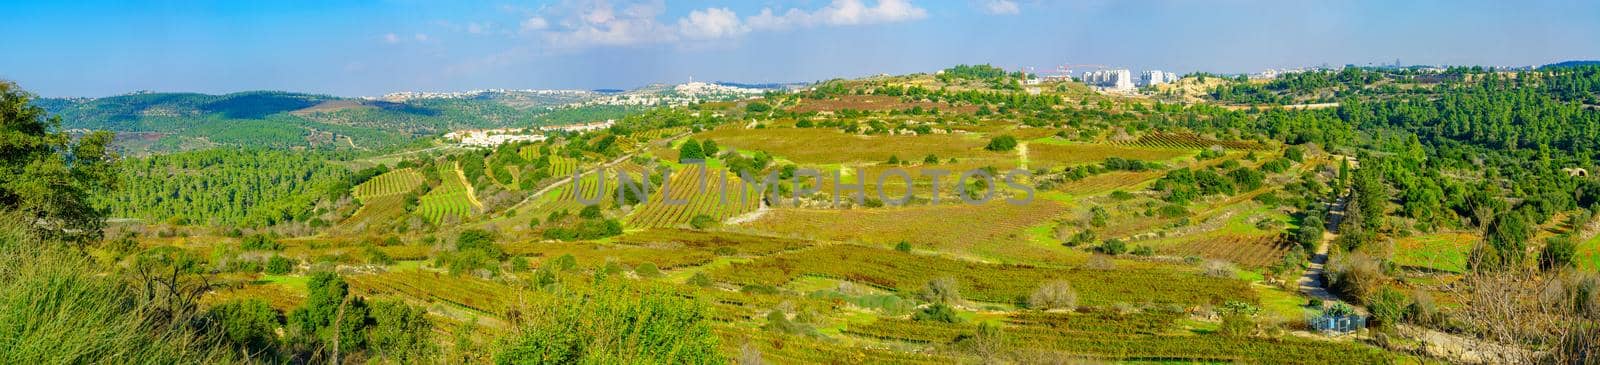 Panoramic view of landscape and vineyards in the Jerusalem Hills, Central Israel